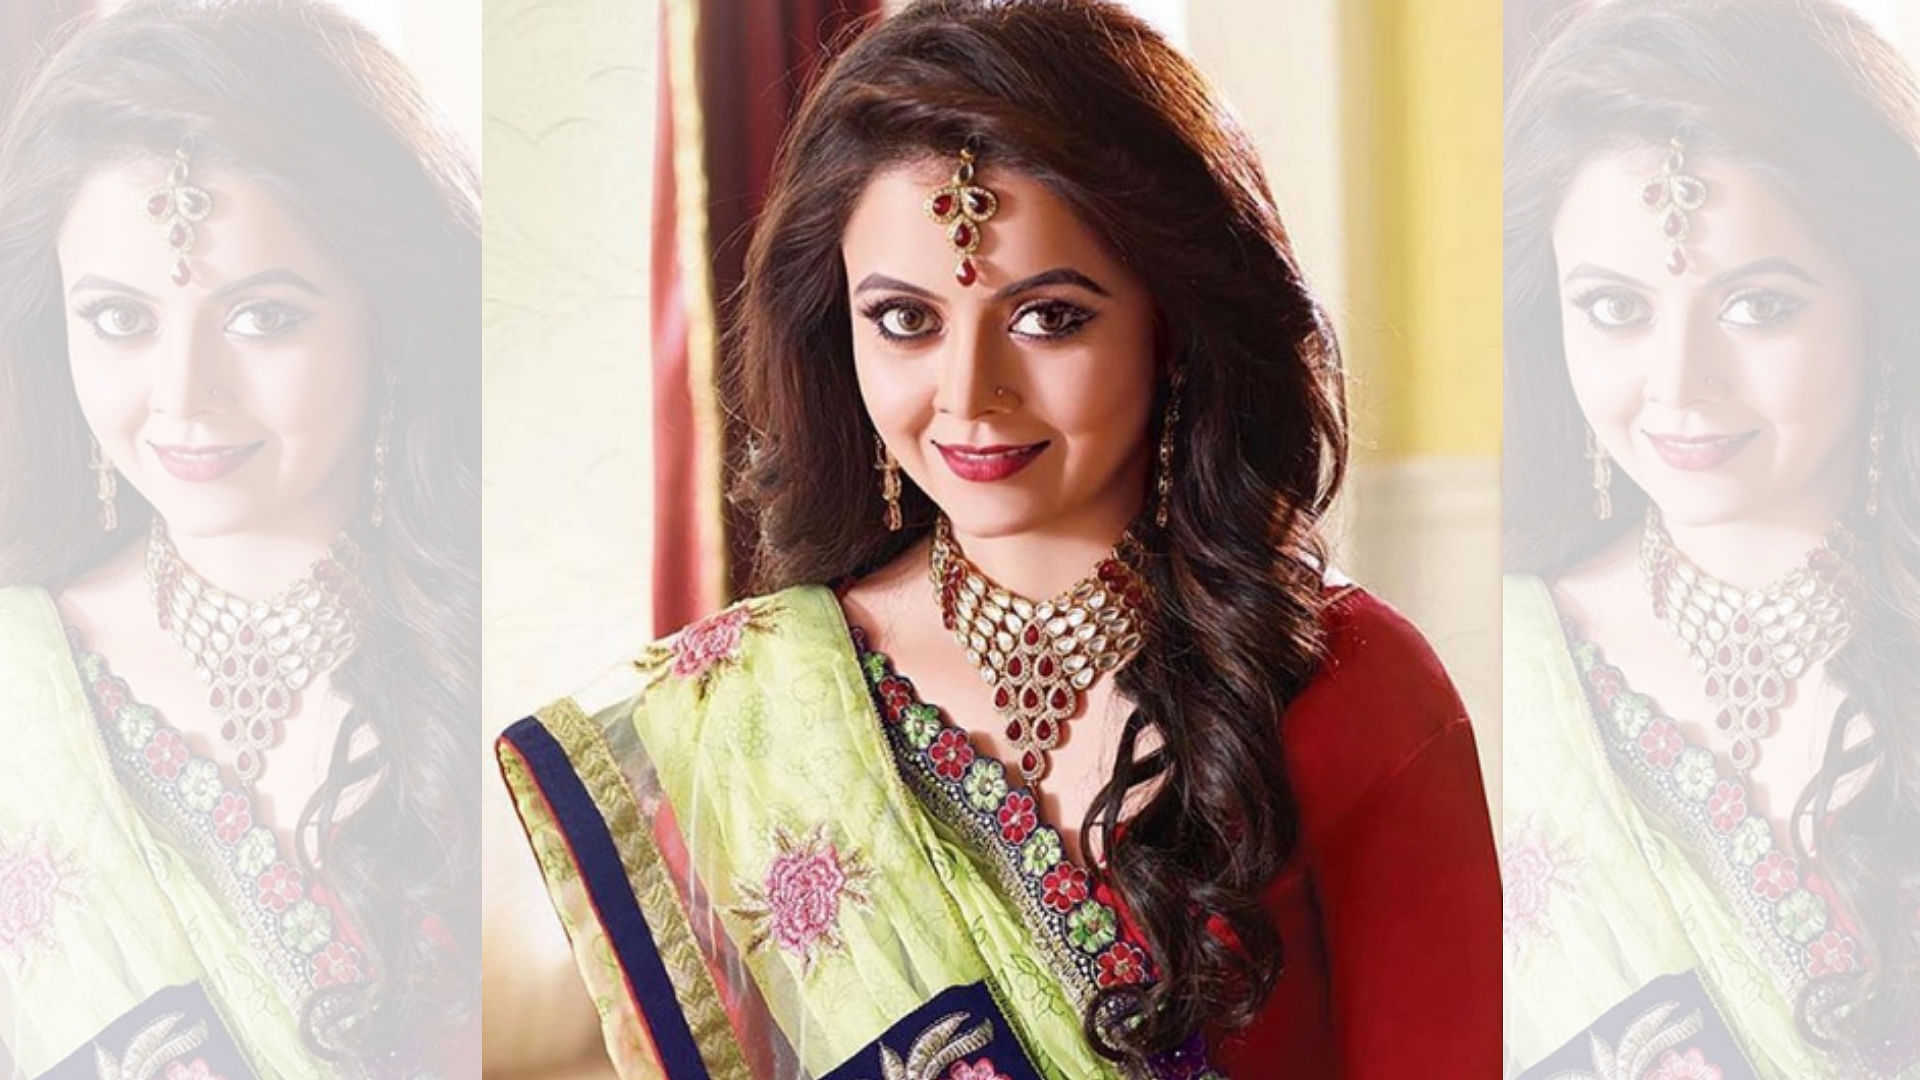 TV actor Devoleena Bhattacharjee, who was grilled for several hours by police in Mumbai’s Ghatkopar in connection with diamond merchant and builder, Rajeswar Kishorlal Udhani.